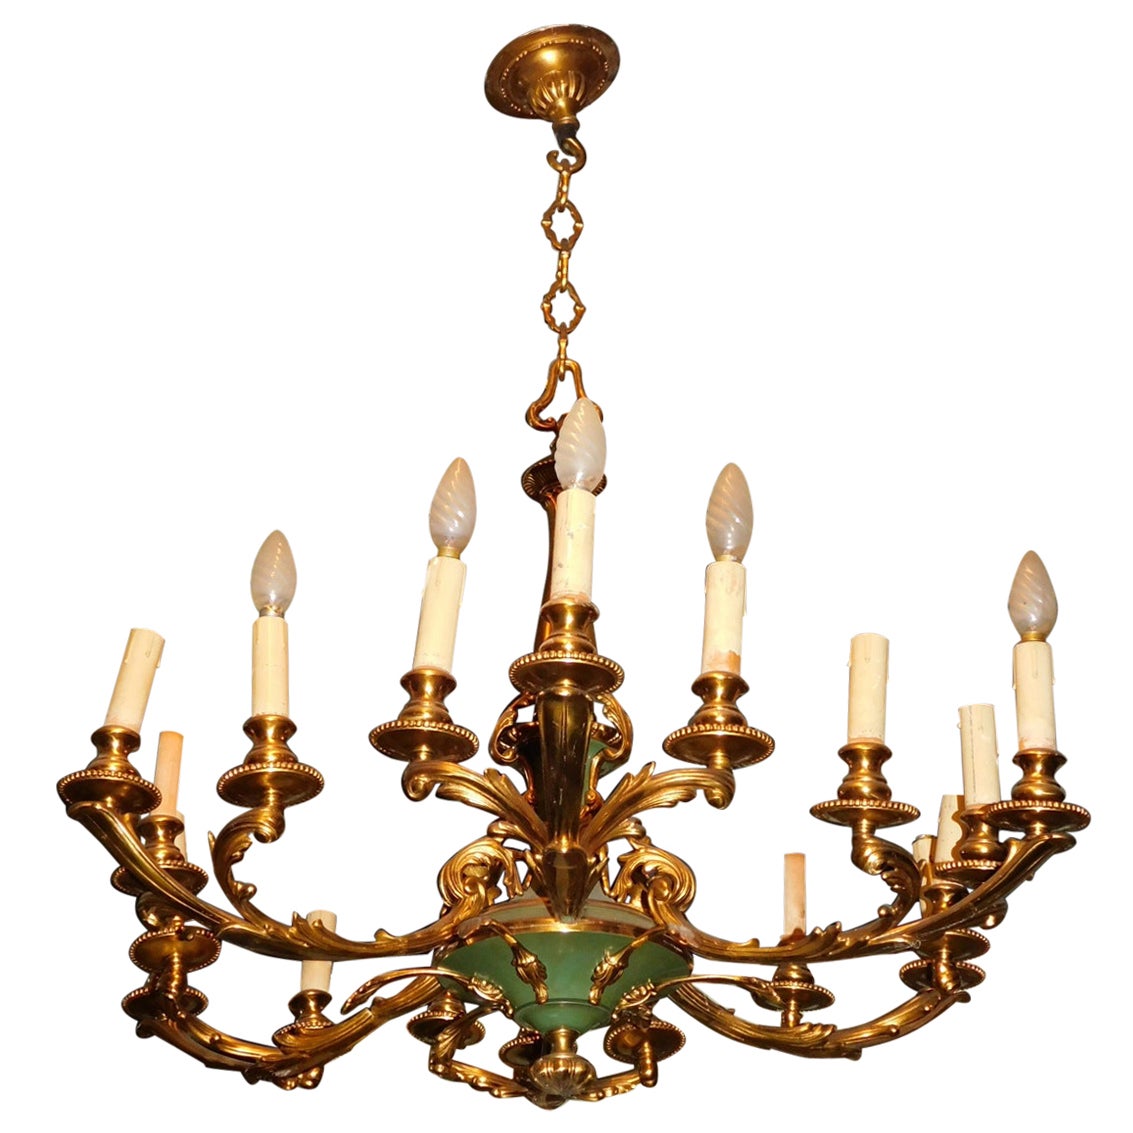 Ceiling Chandelier Lamp, 18 Lights, Gilded Brass, Italian Liberty '900 For Sale